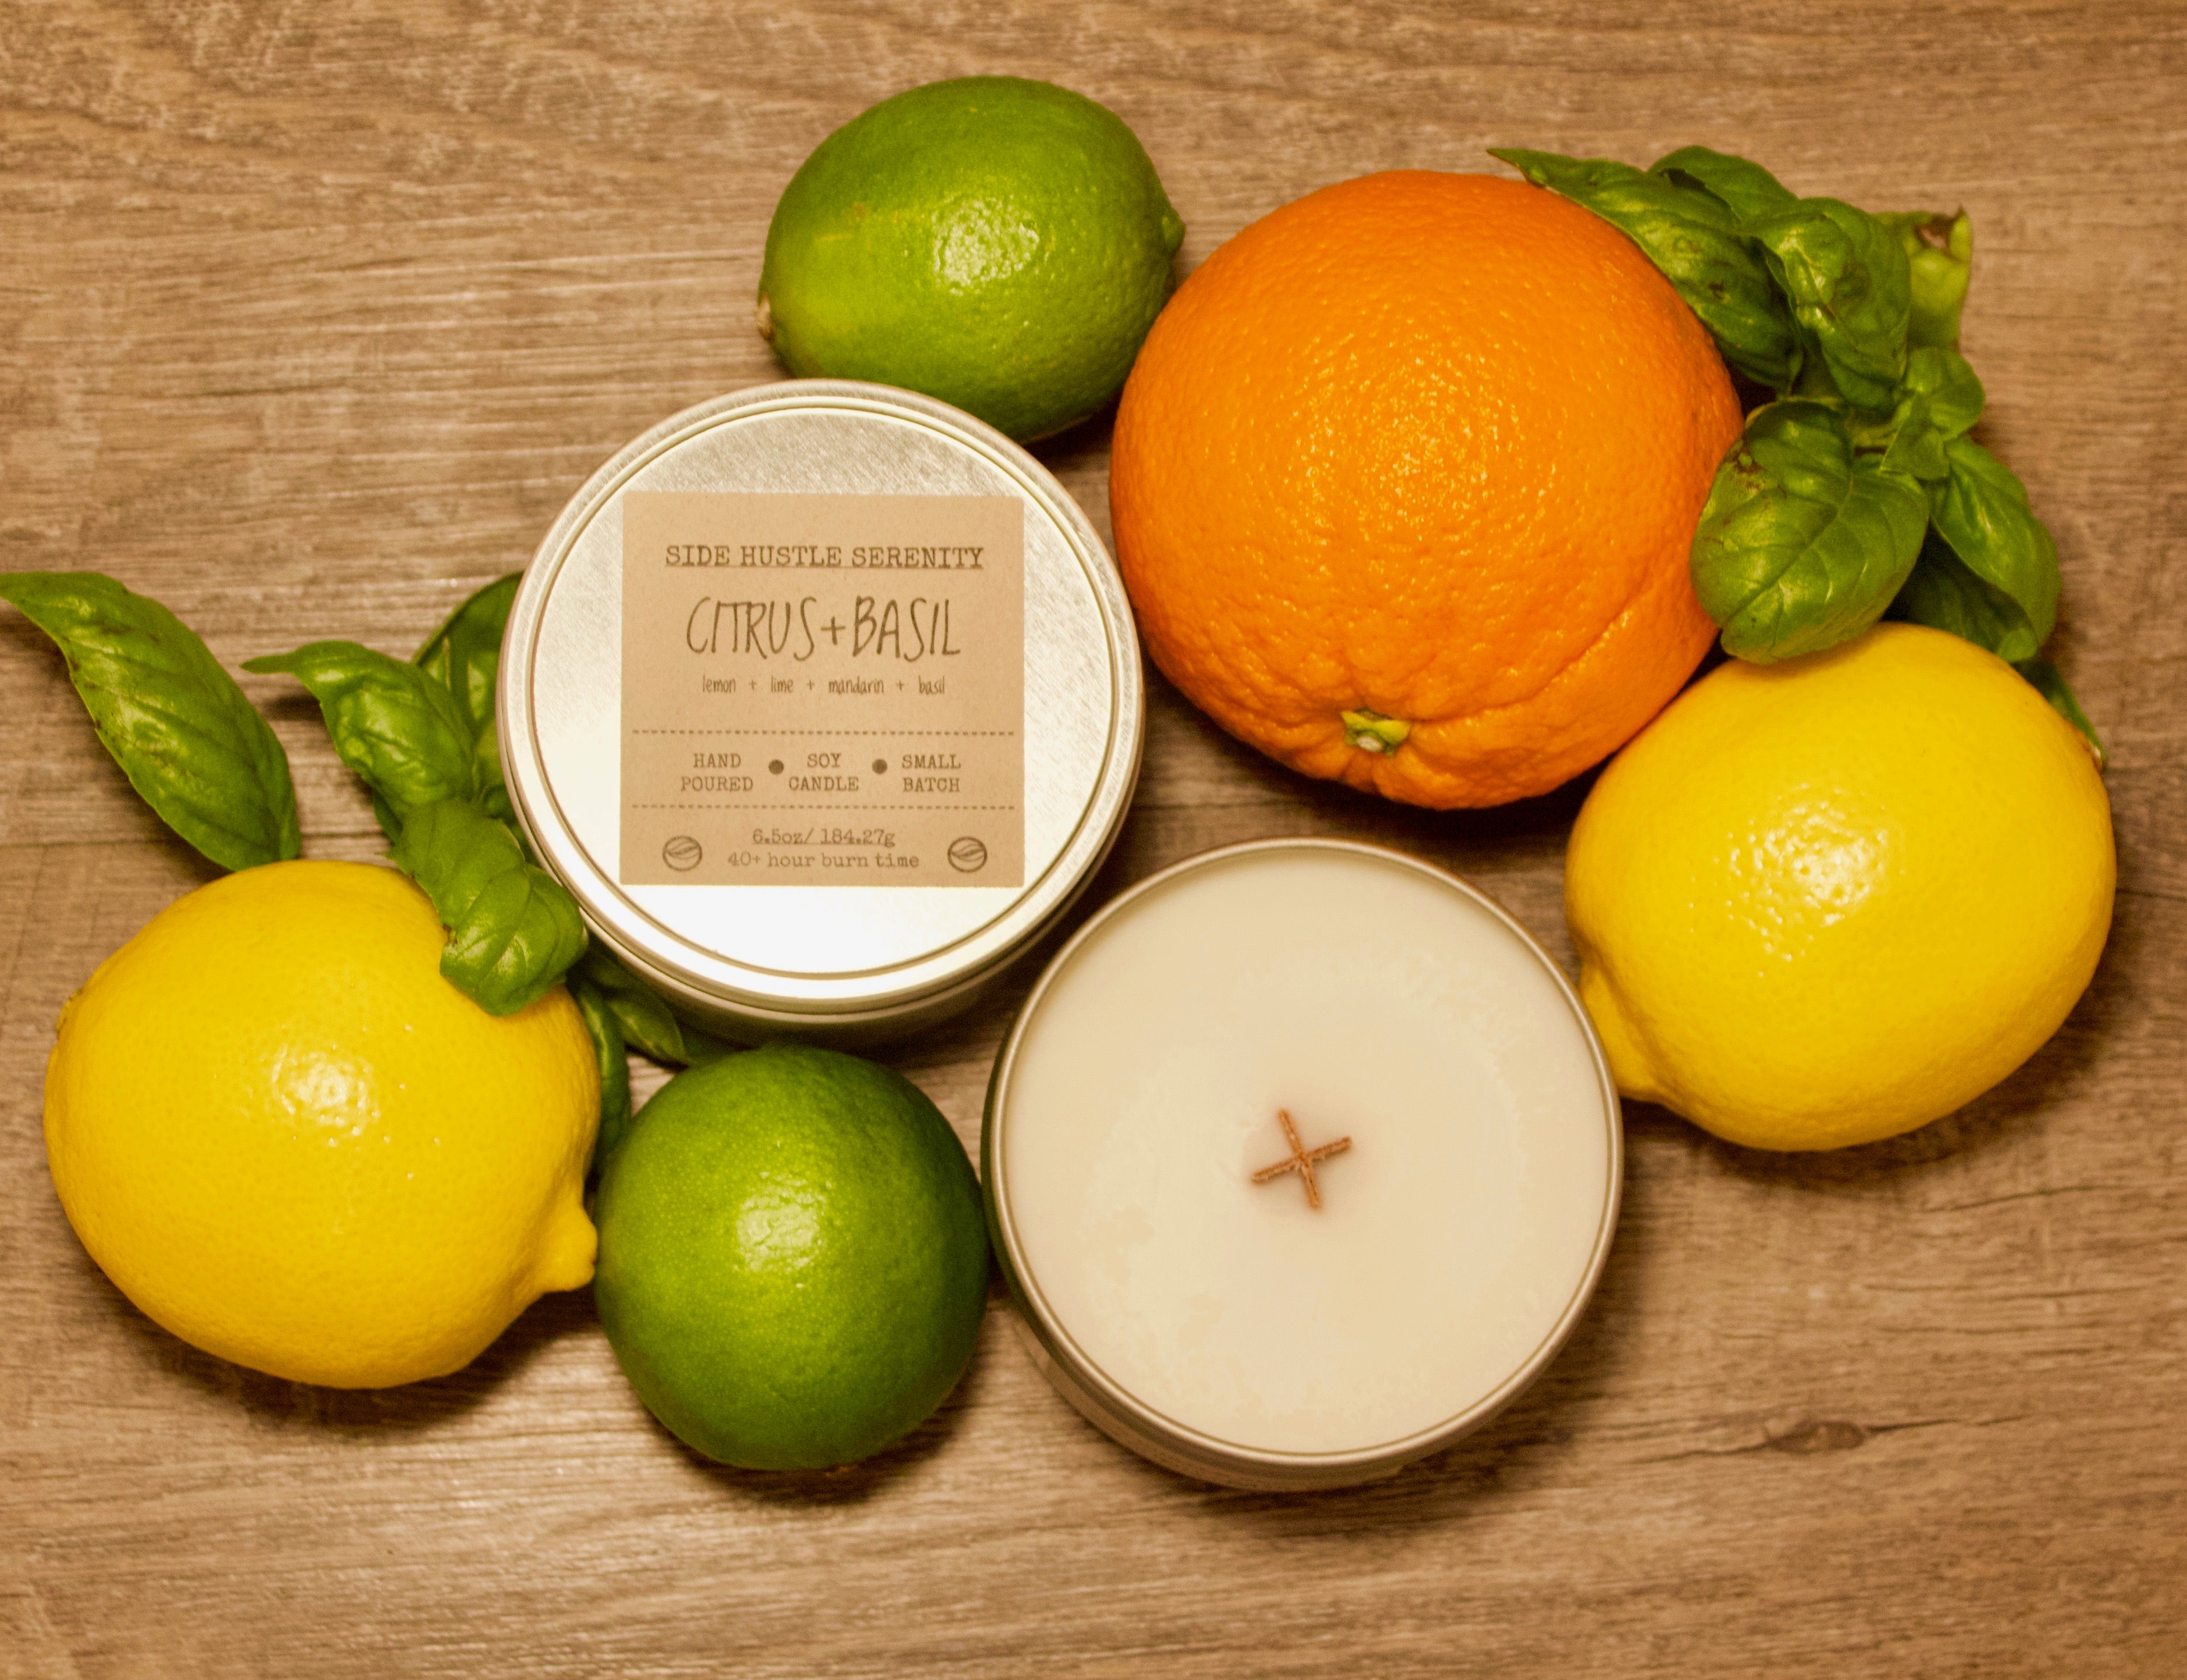 Citrus + Basil Scented Soy Candle - Side Hustle Serenity